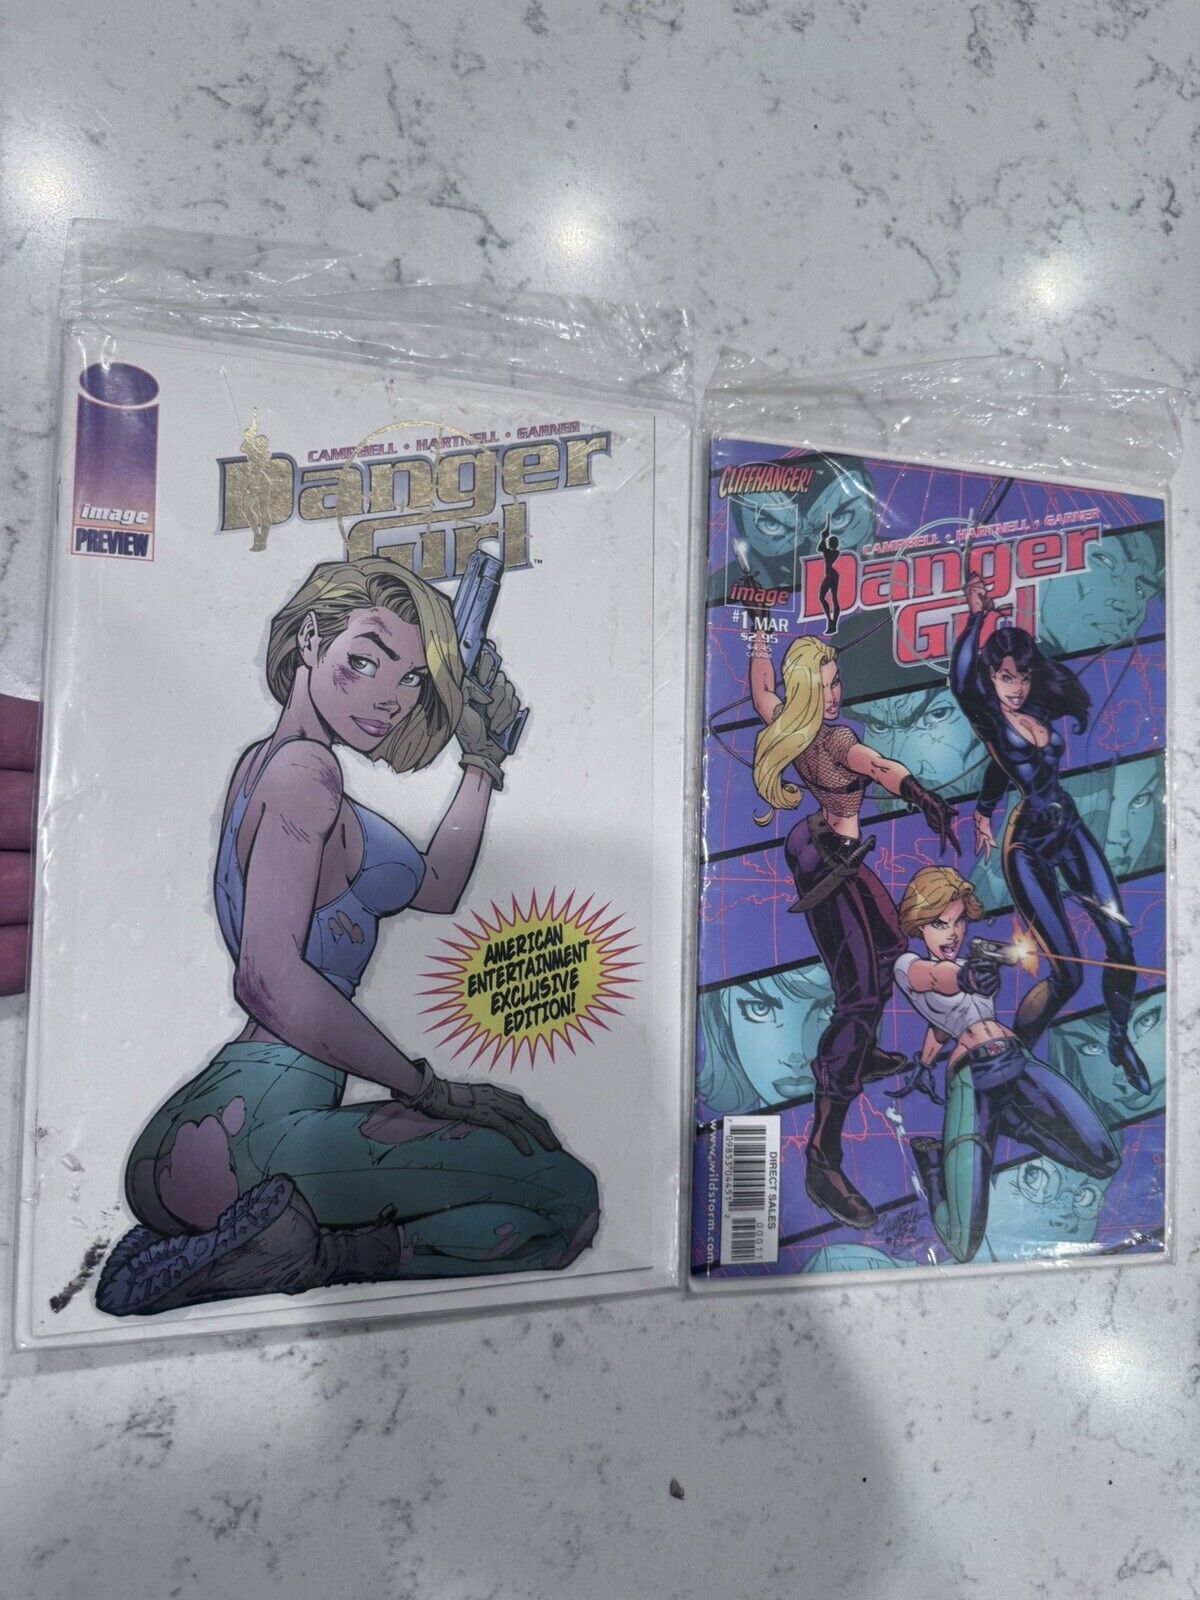 Danger Girl Preview Exclusive Edition / J Scott Campbell + #1 March